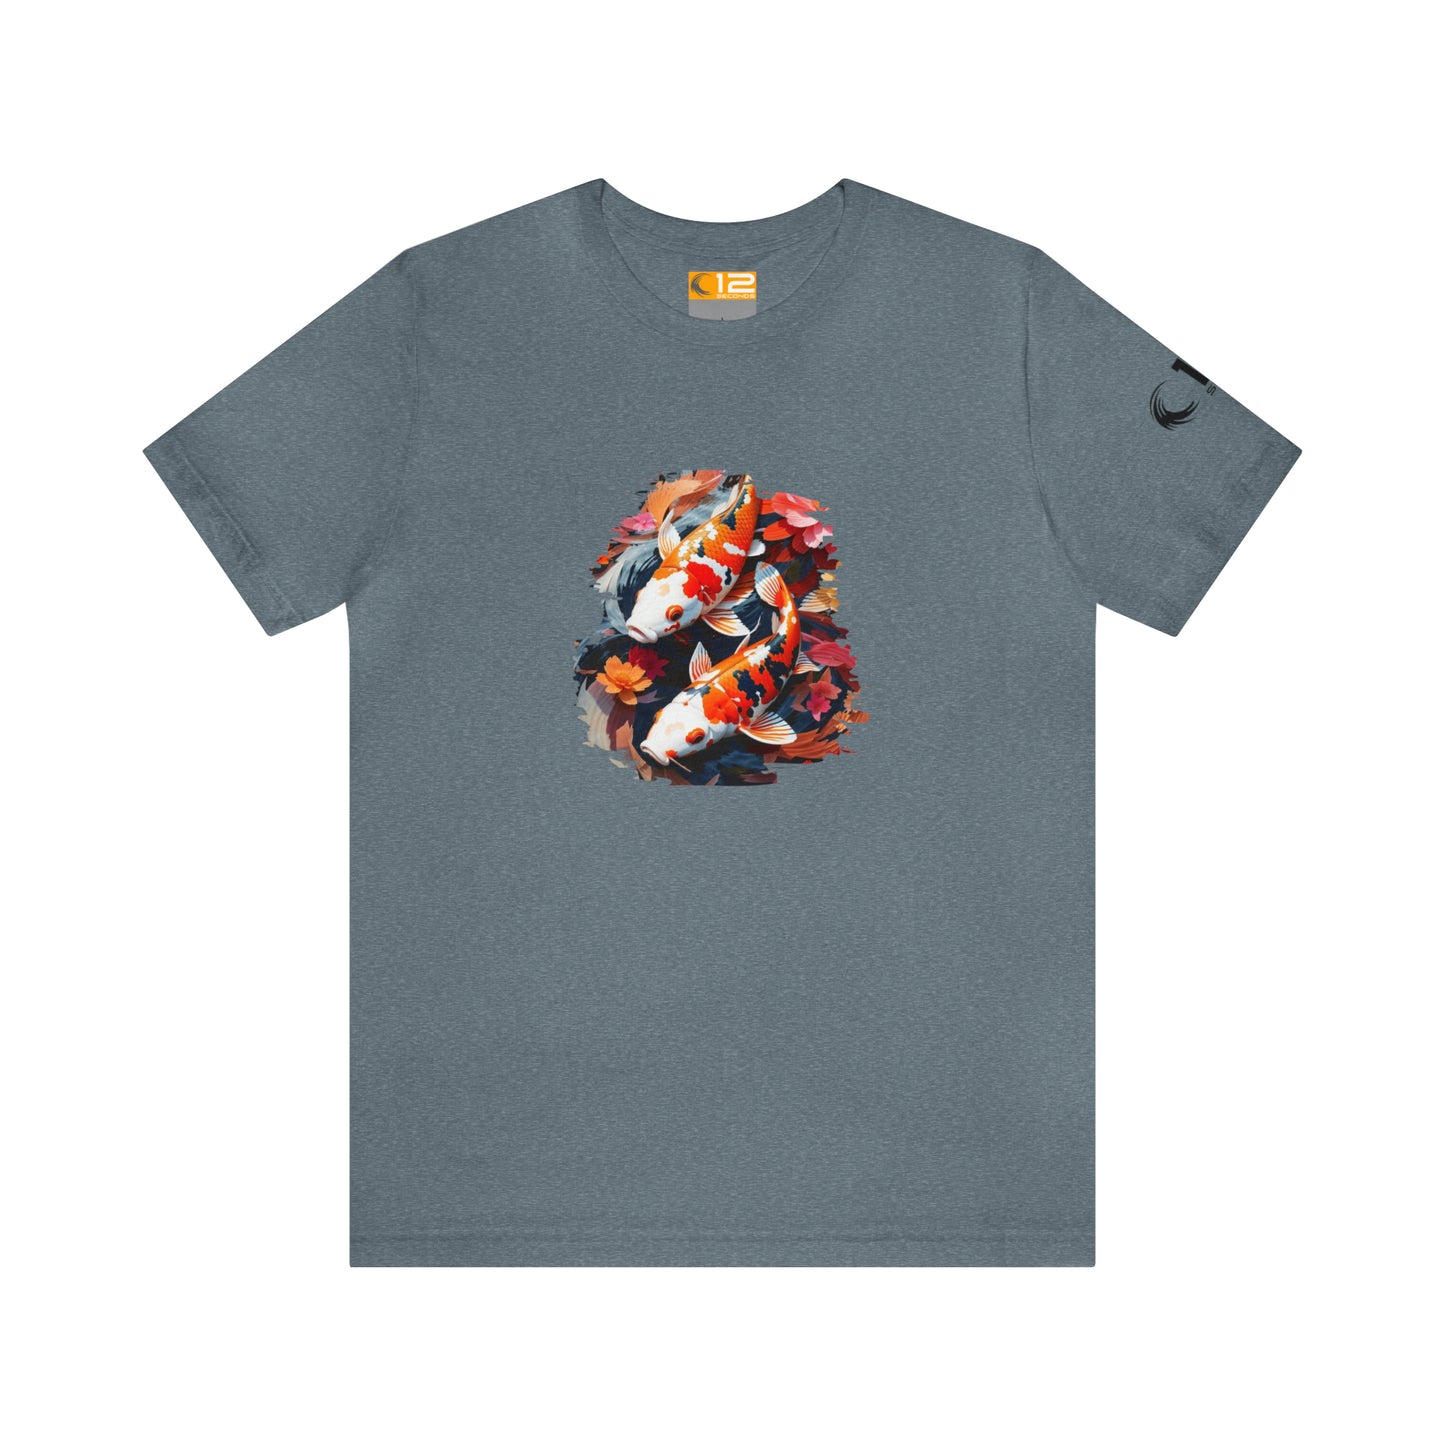 Jersey Short Sleeve Tee - FLORAL KOI - 12 SECONDS APPAREL